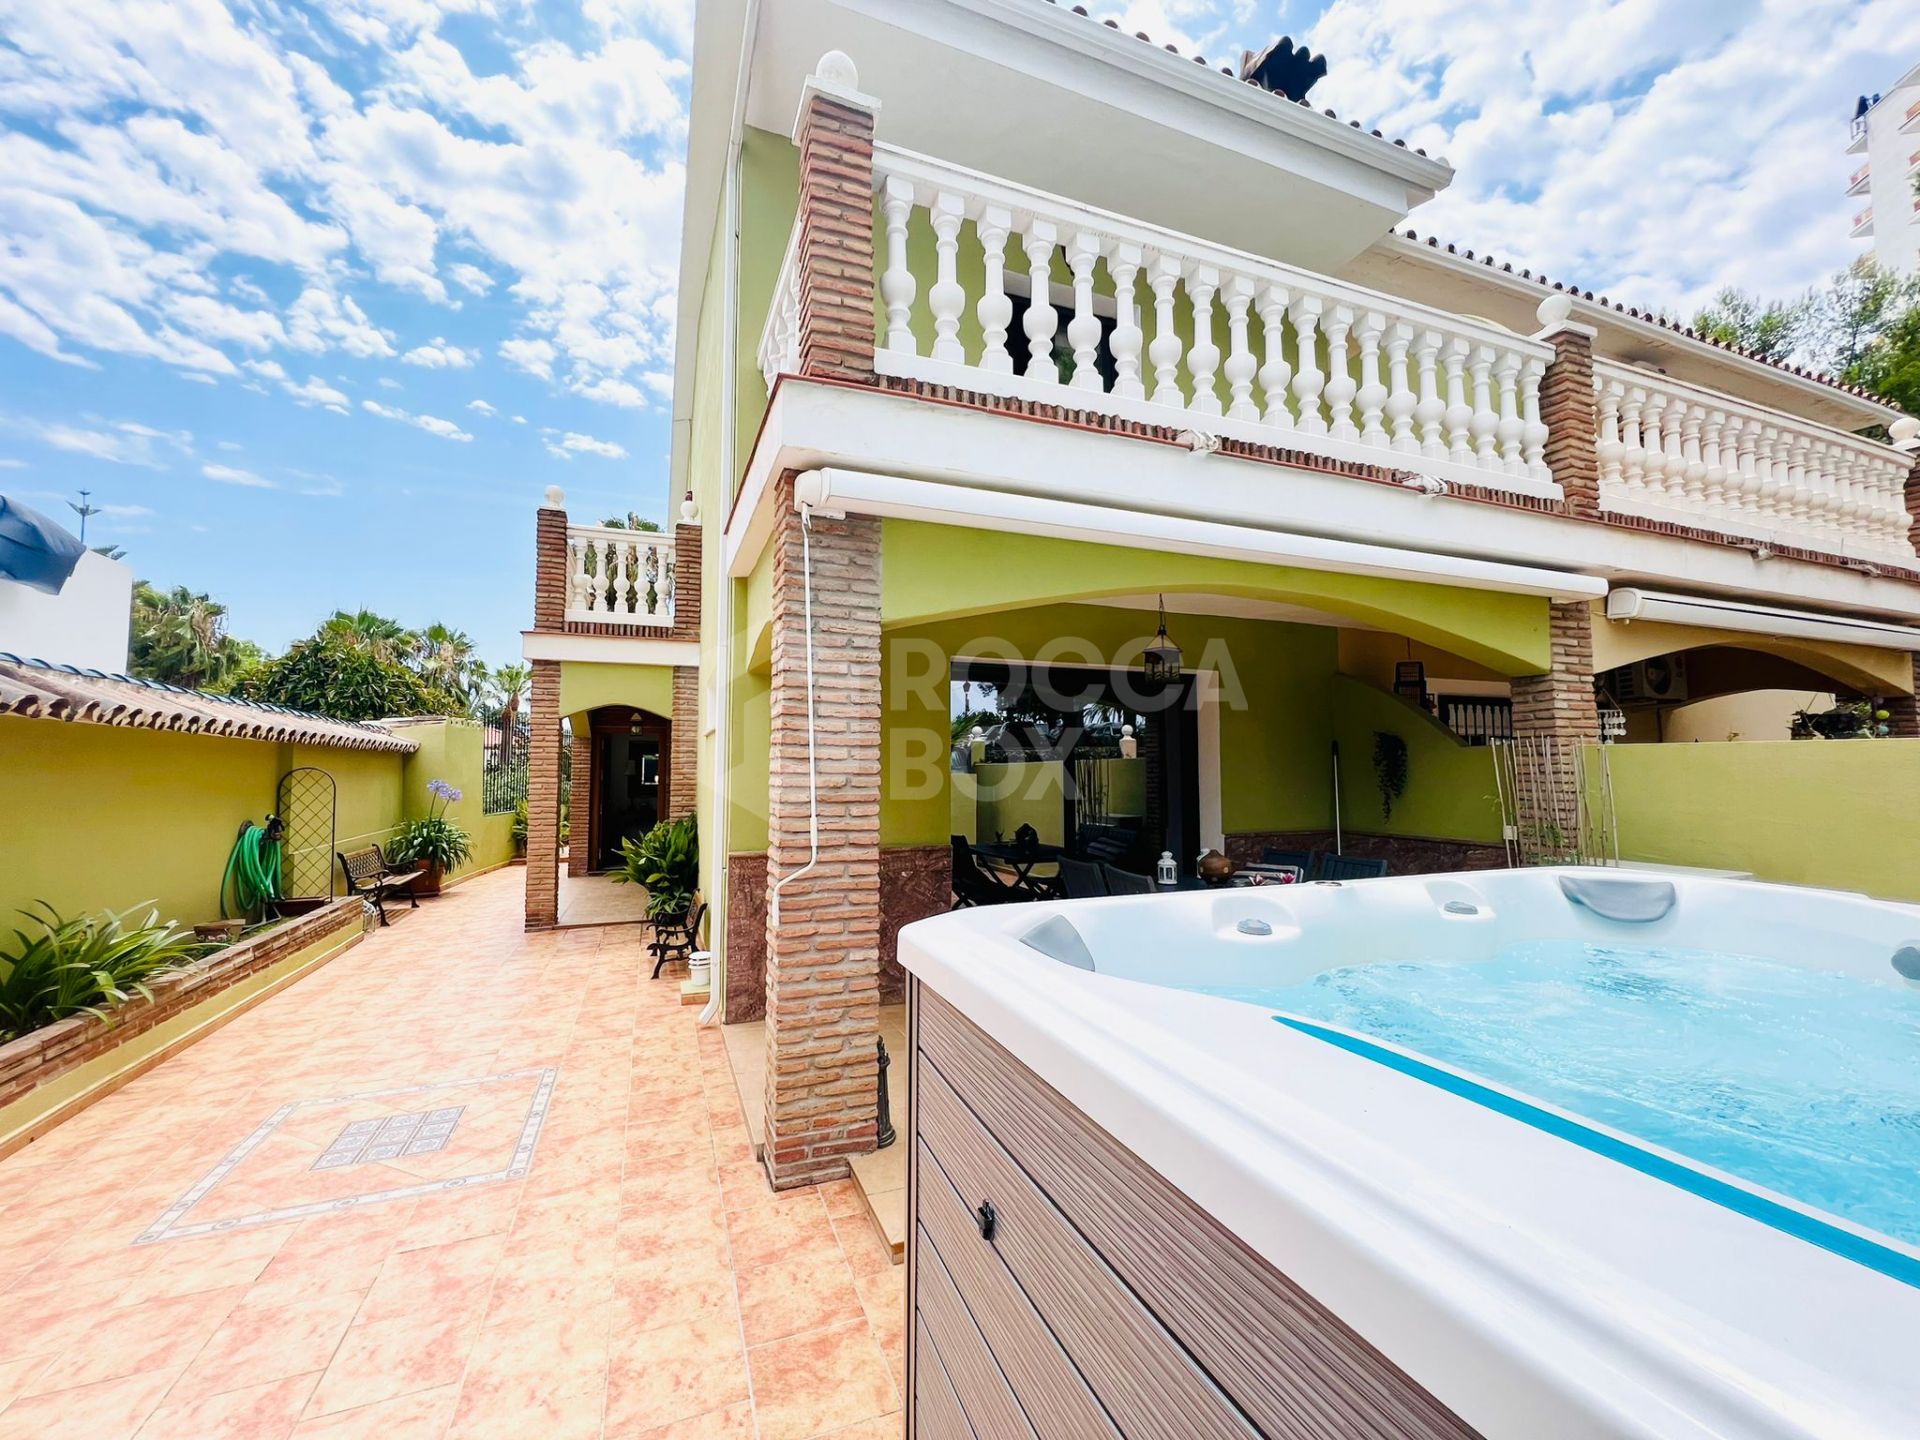 Exquisite Renovated Semi-Detached Home with Private Pool, Terrace, and Basement in Nueva Andalucia